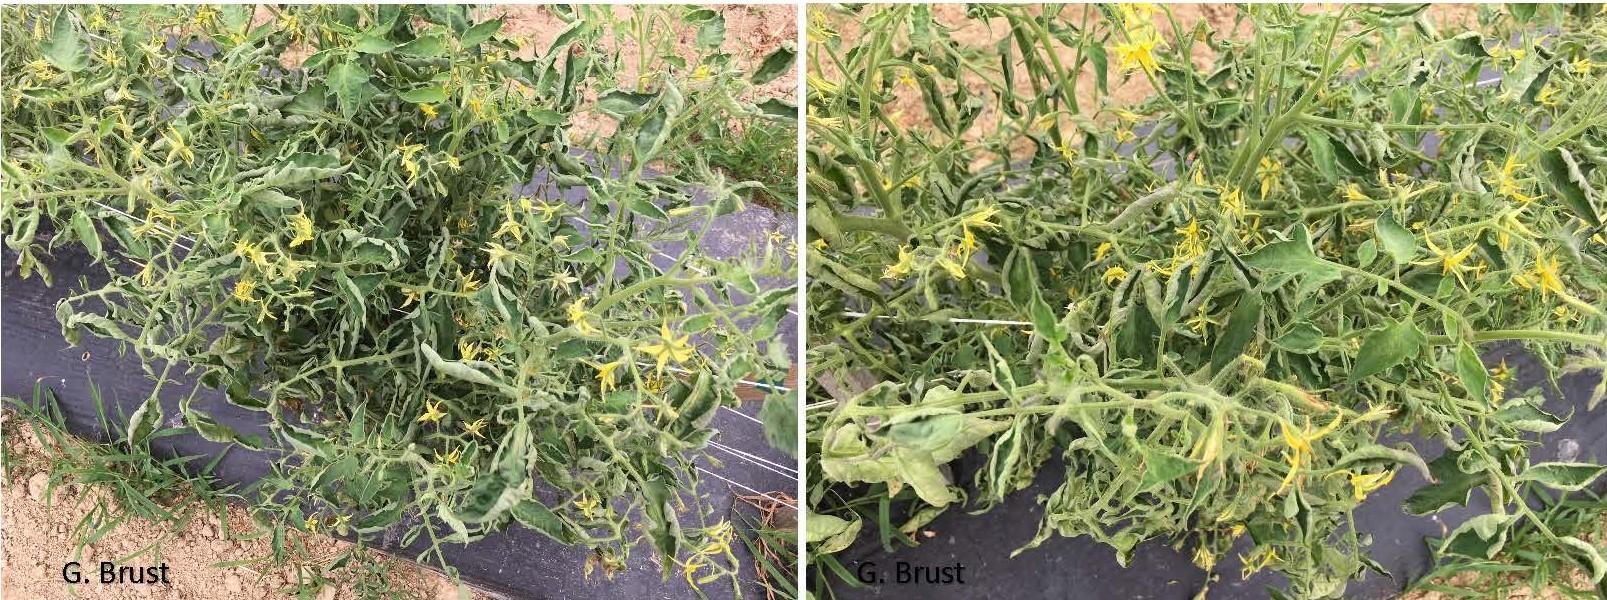 Tomato plants infected with three different mosaic viruses